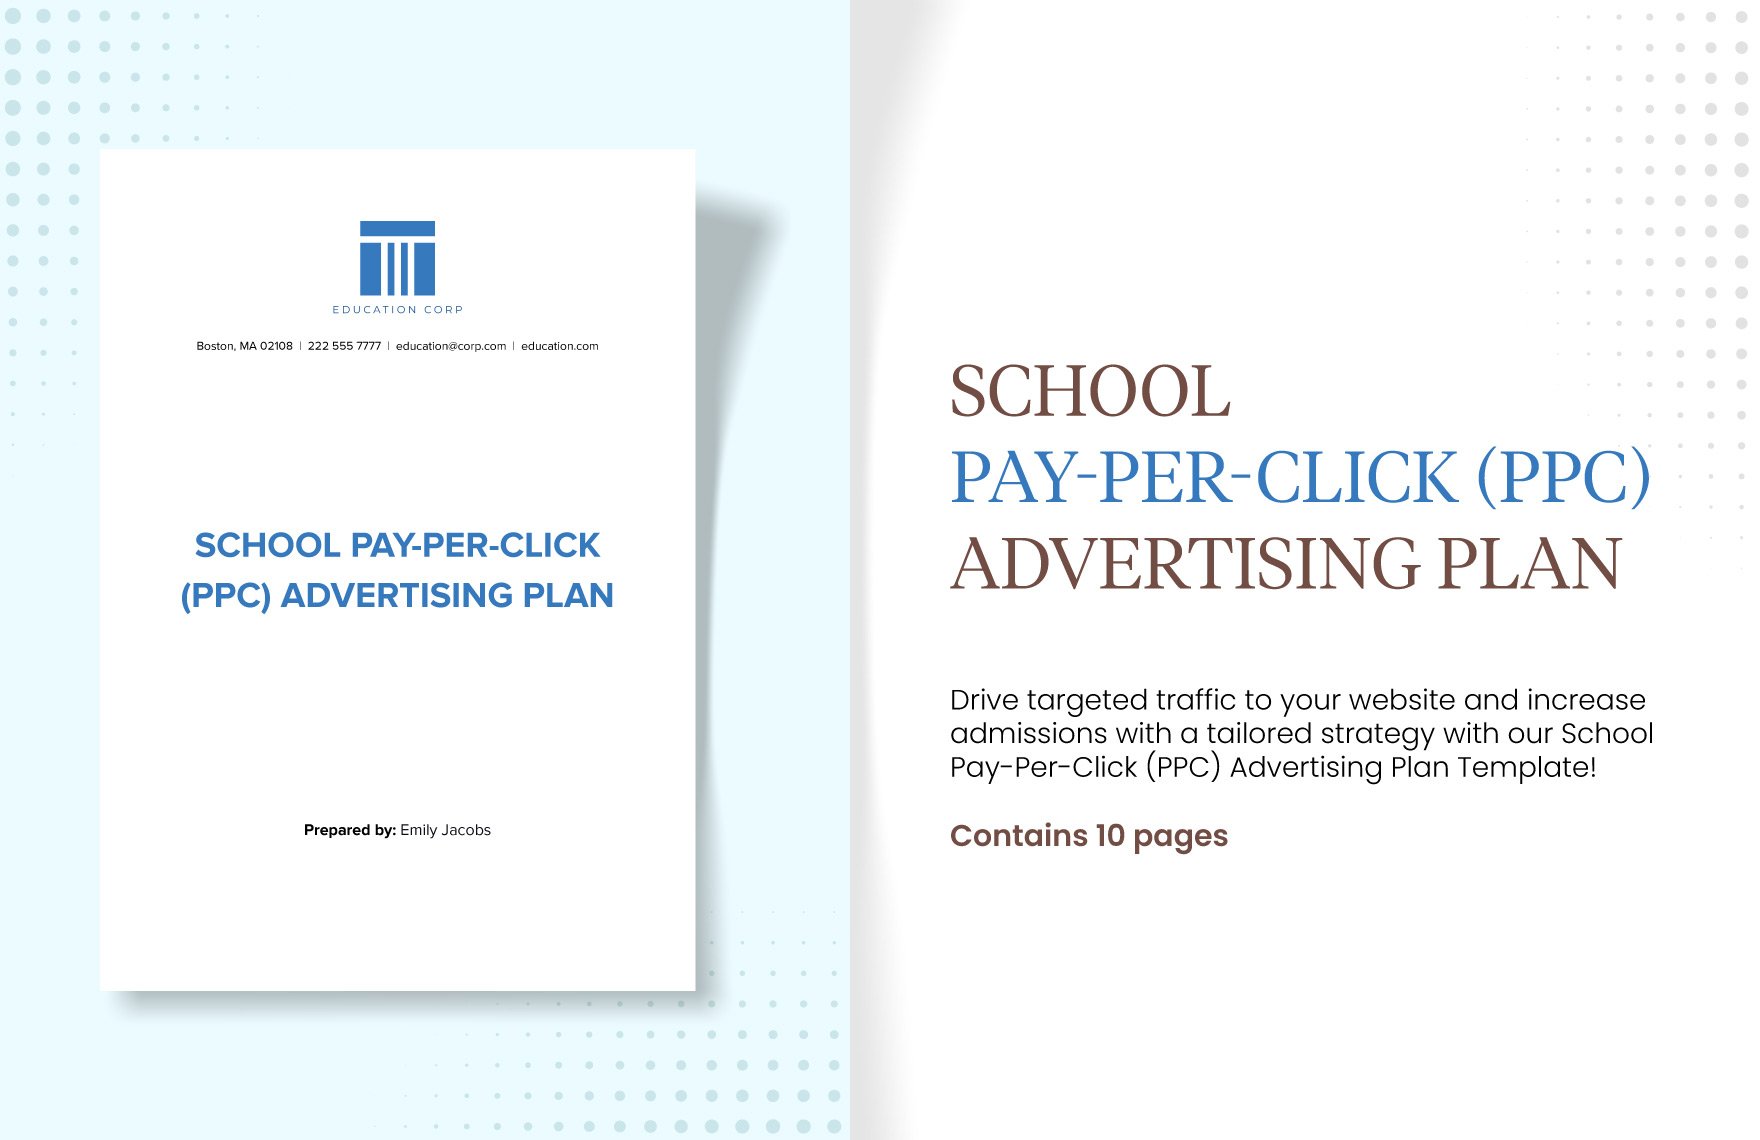 School Pay-Per-Click (PPC) Advertising Plan Template in Word, Google Docs, PDF